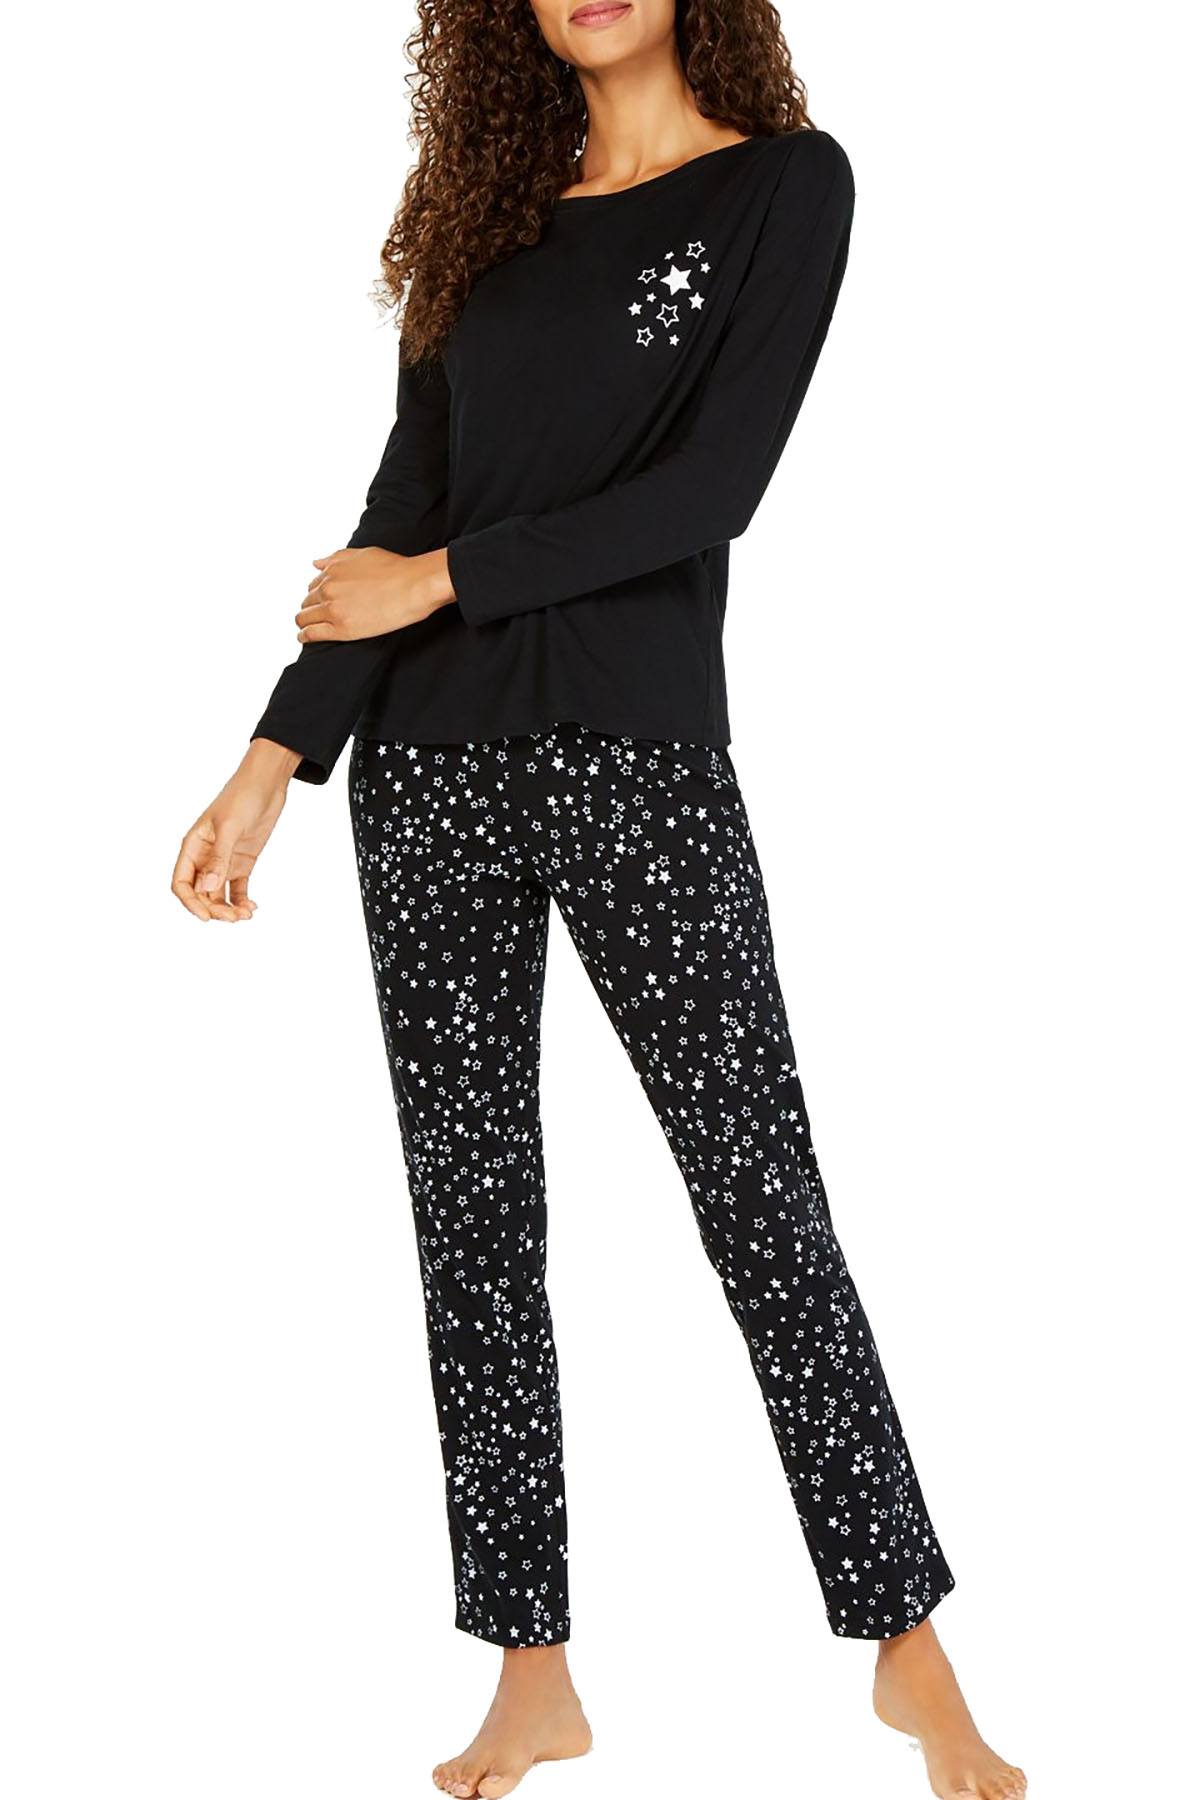 Jenni Cotton Graphic Top / Pants PJ Set in Scattered Stars